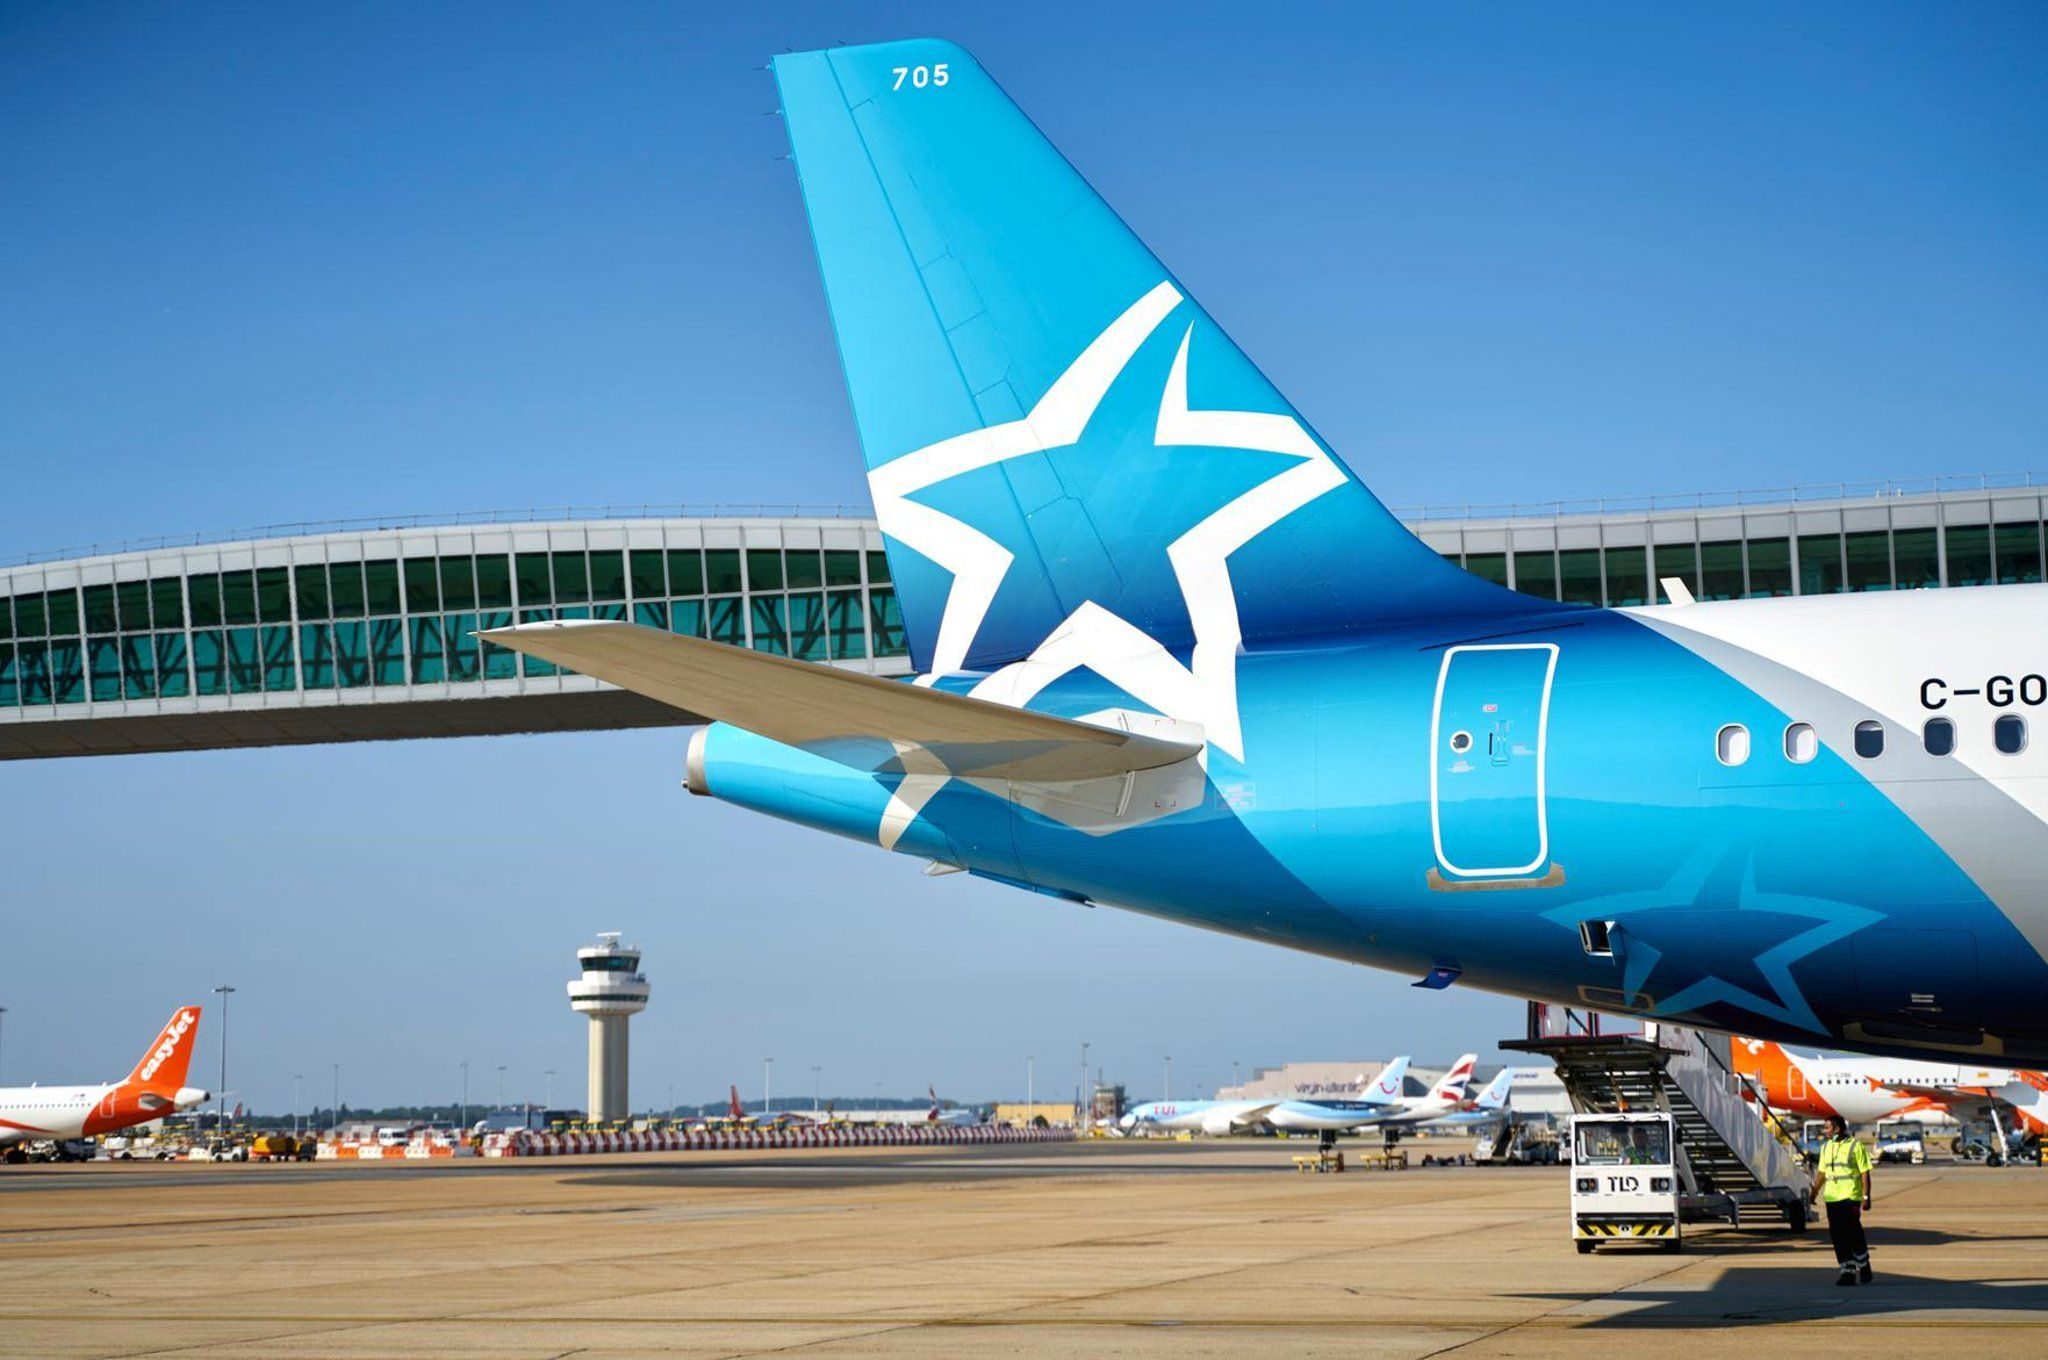 Air Transat Launches Québec City To London Flights With The Airbus A321LR